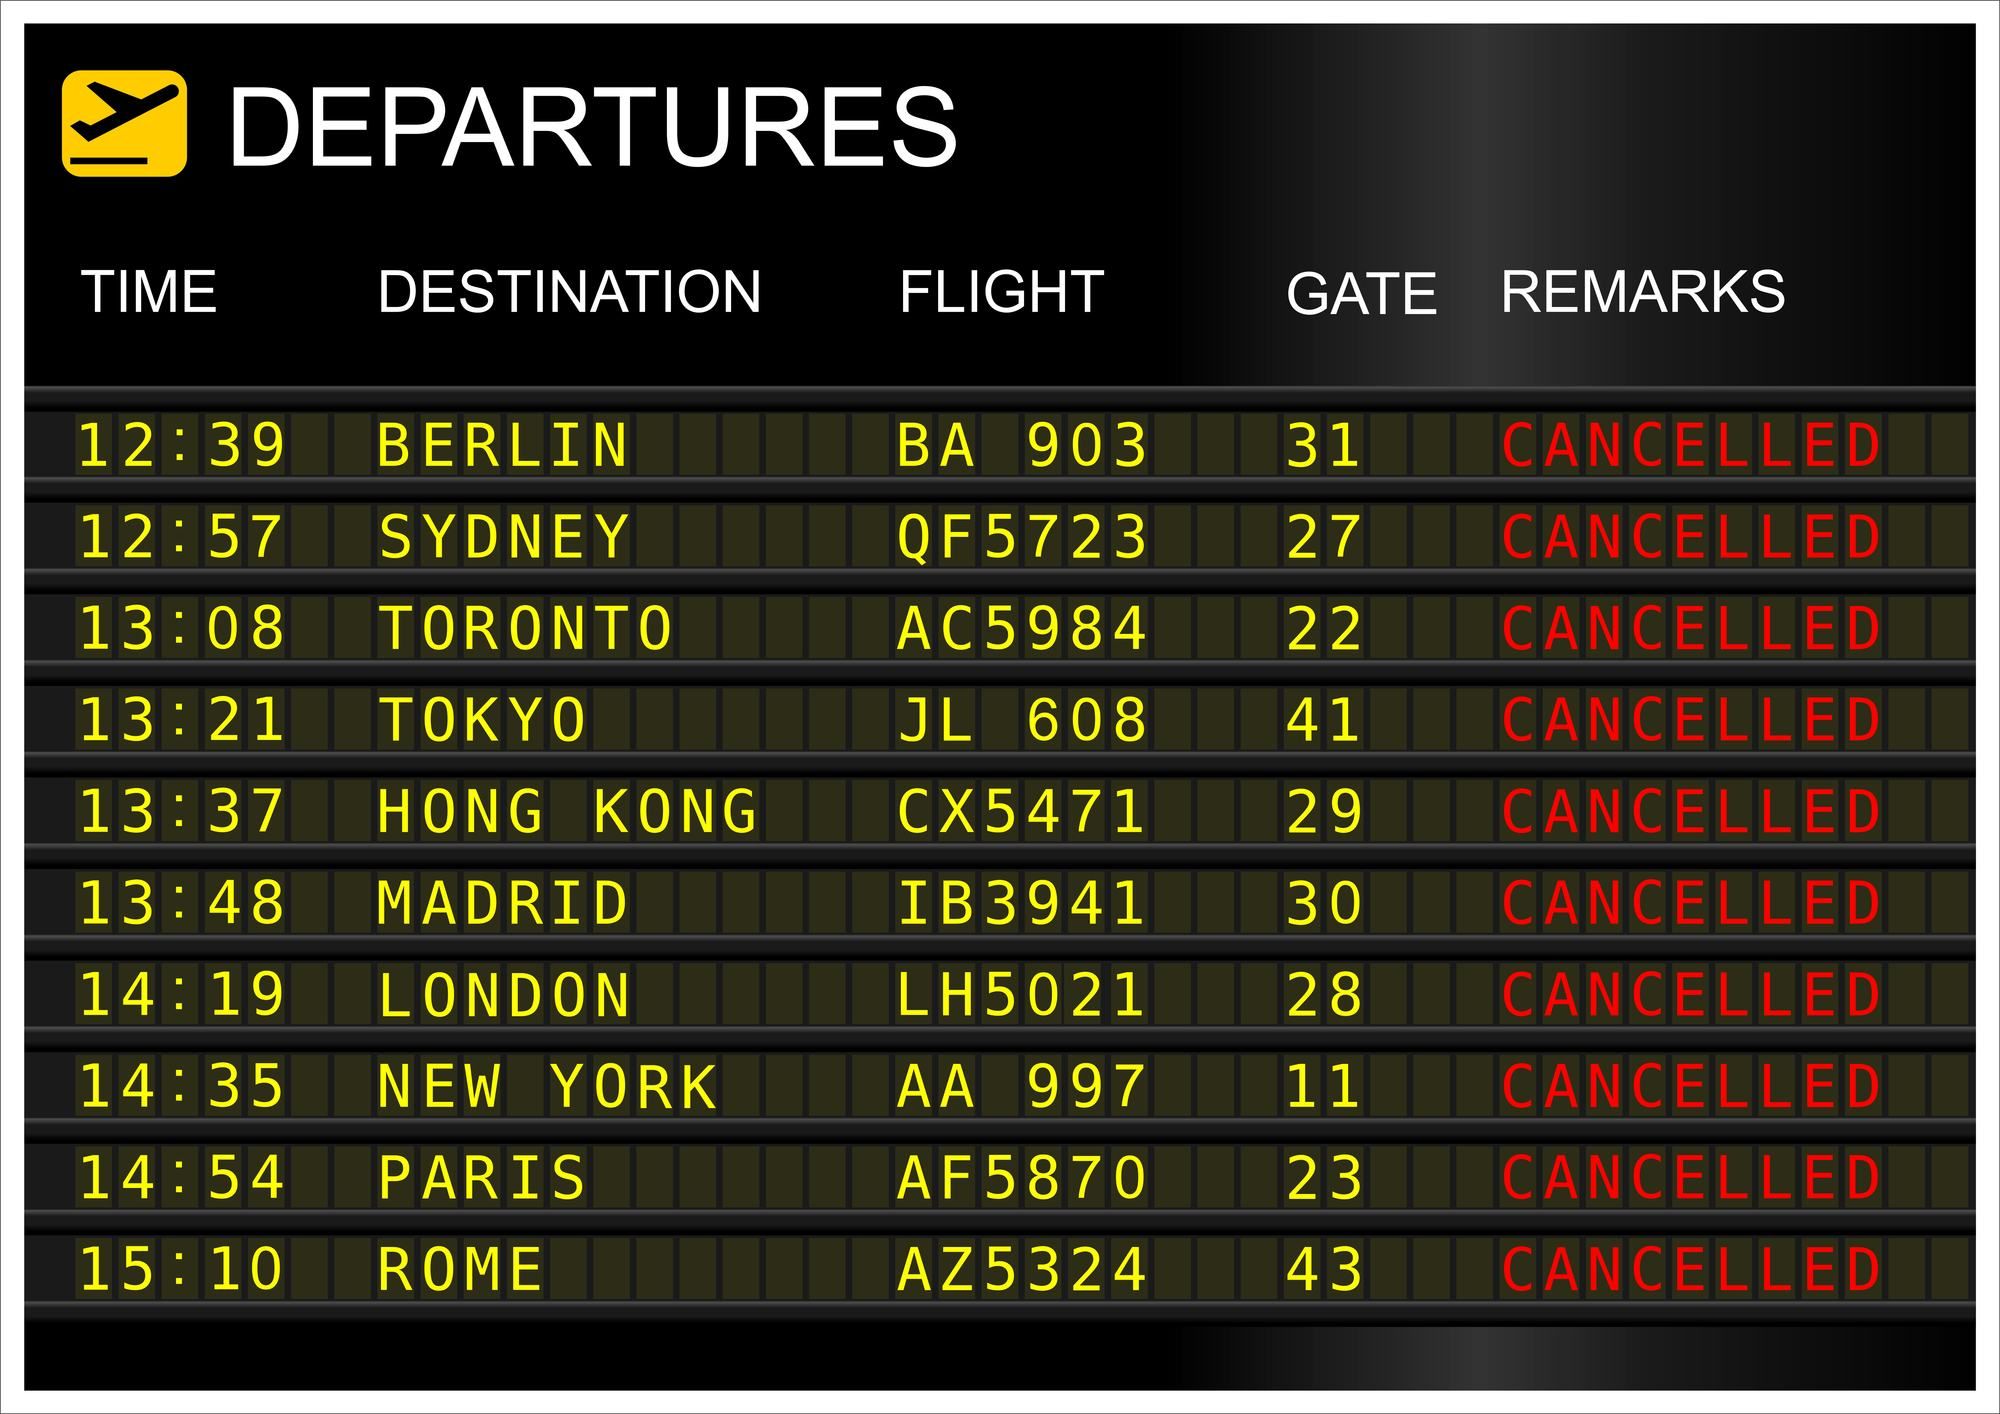 Departure board showing flights cancelled regarding Canadian consumers trying to get refunds from cancelled flights